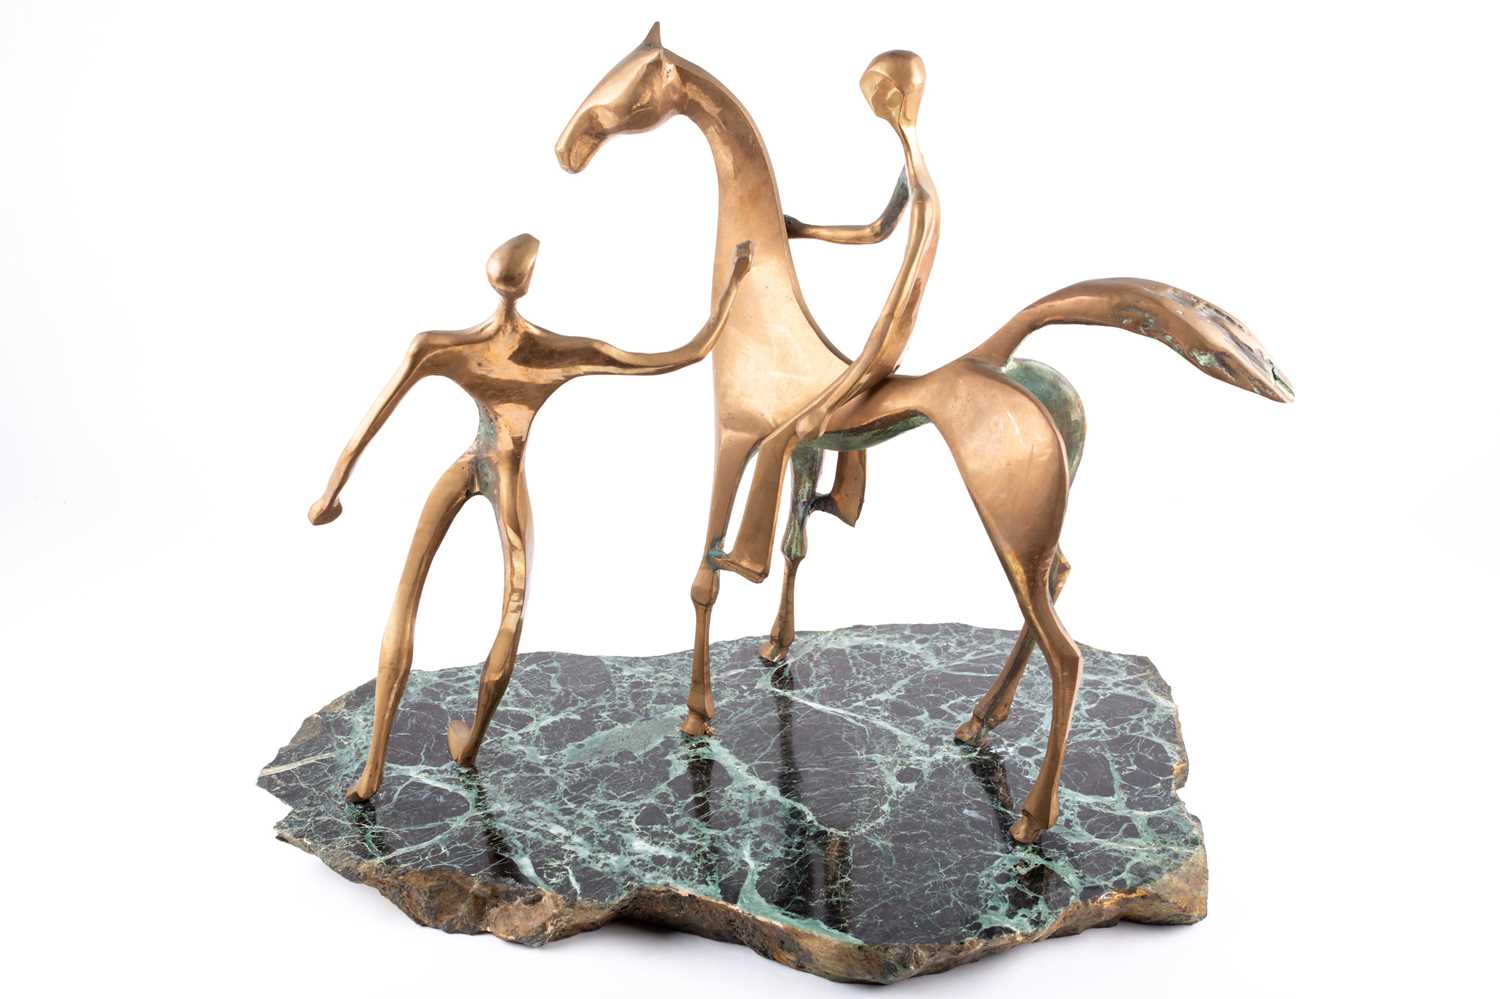 Attributed to John Mulvey (b.1939) British, a modernist mid-century style bronze sculpture depicting